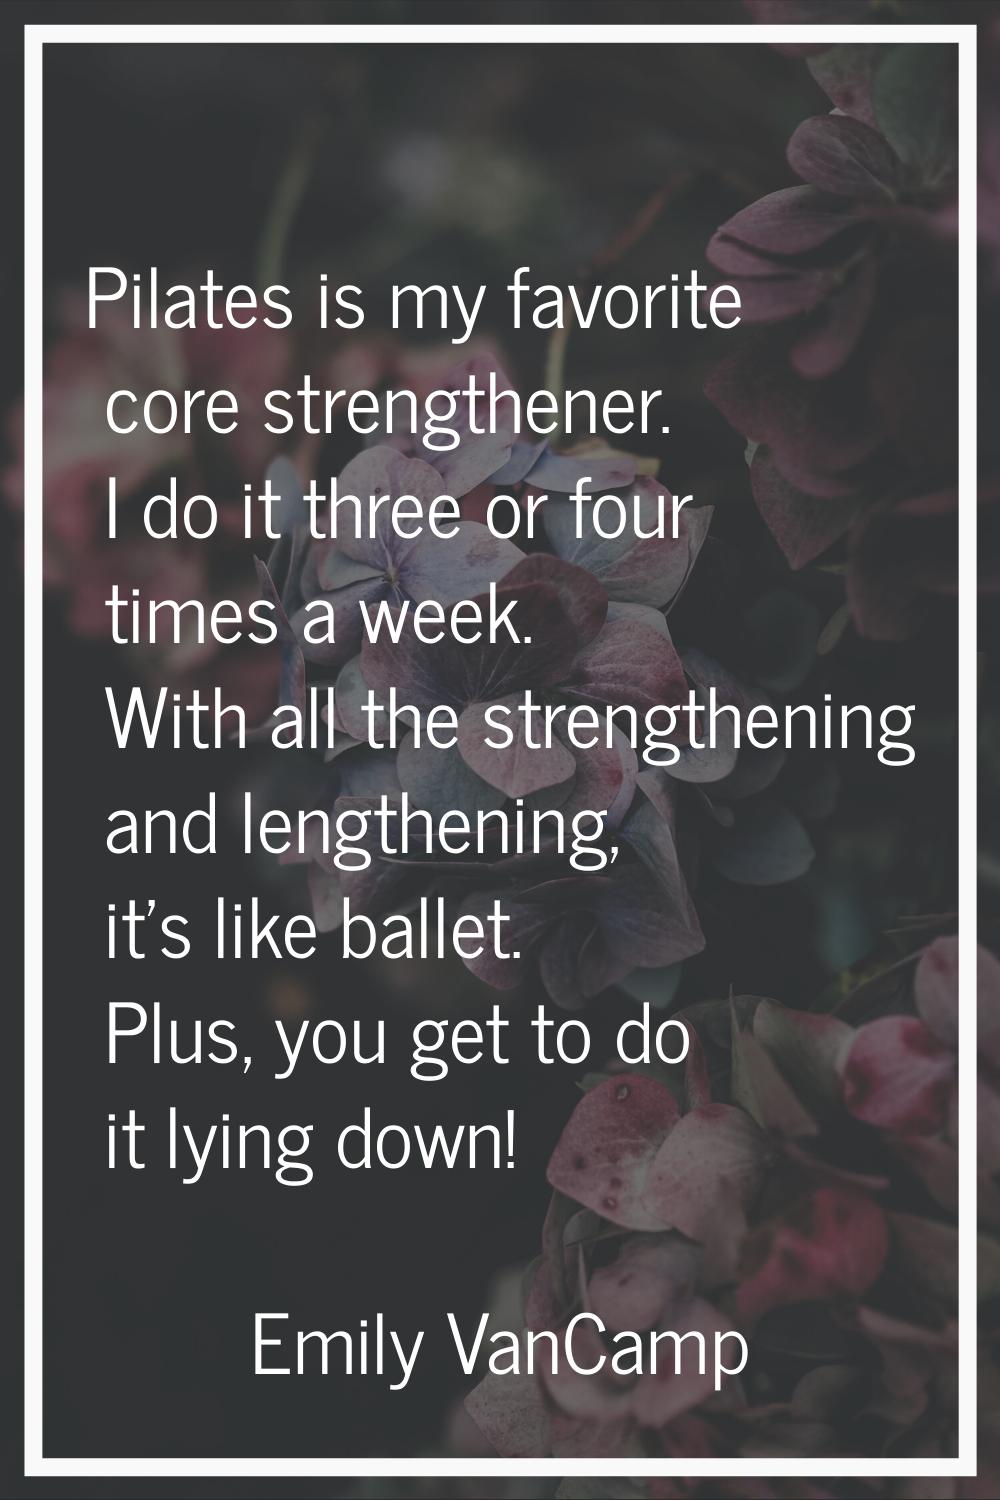 Pilates is my favorite core strengthener. I do it three or four times a week. With all the strength